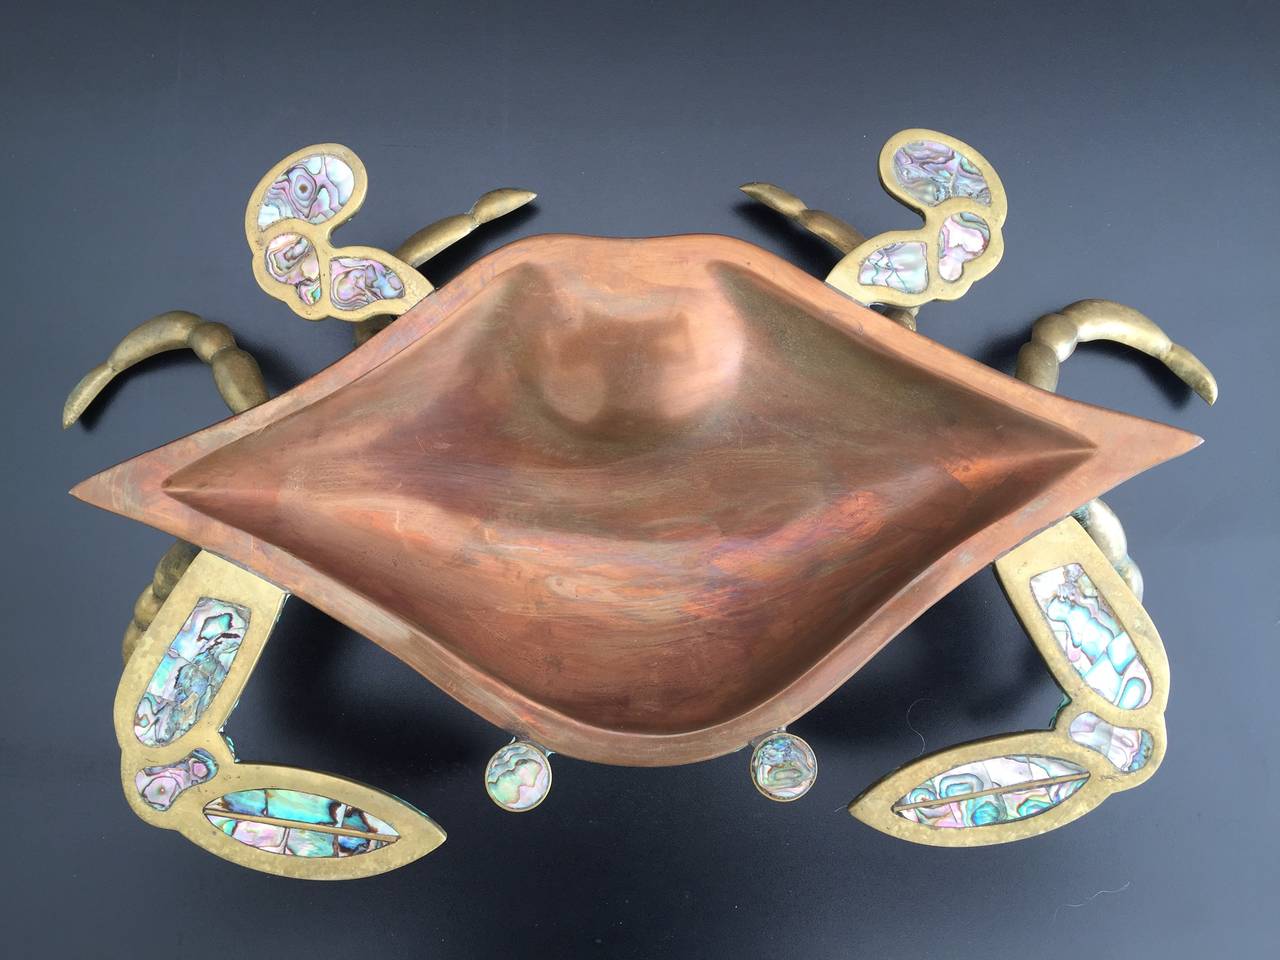 Brass copper and abalone crab family attributed to Los Castillos.
Small crabs are 9